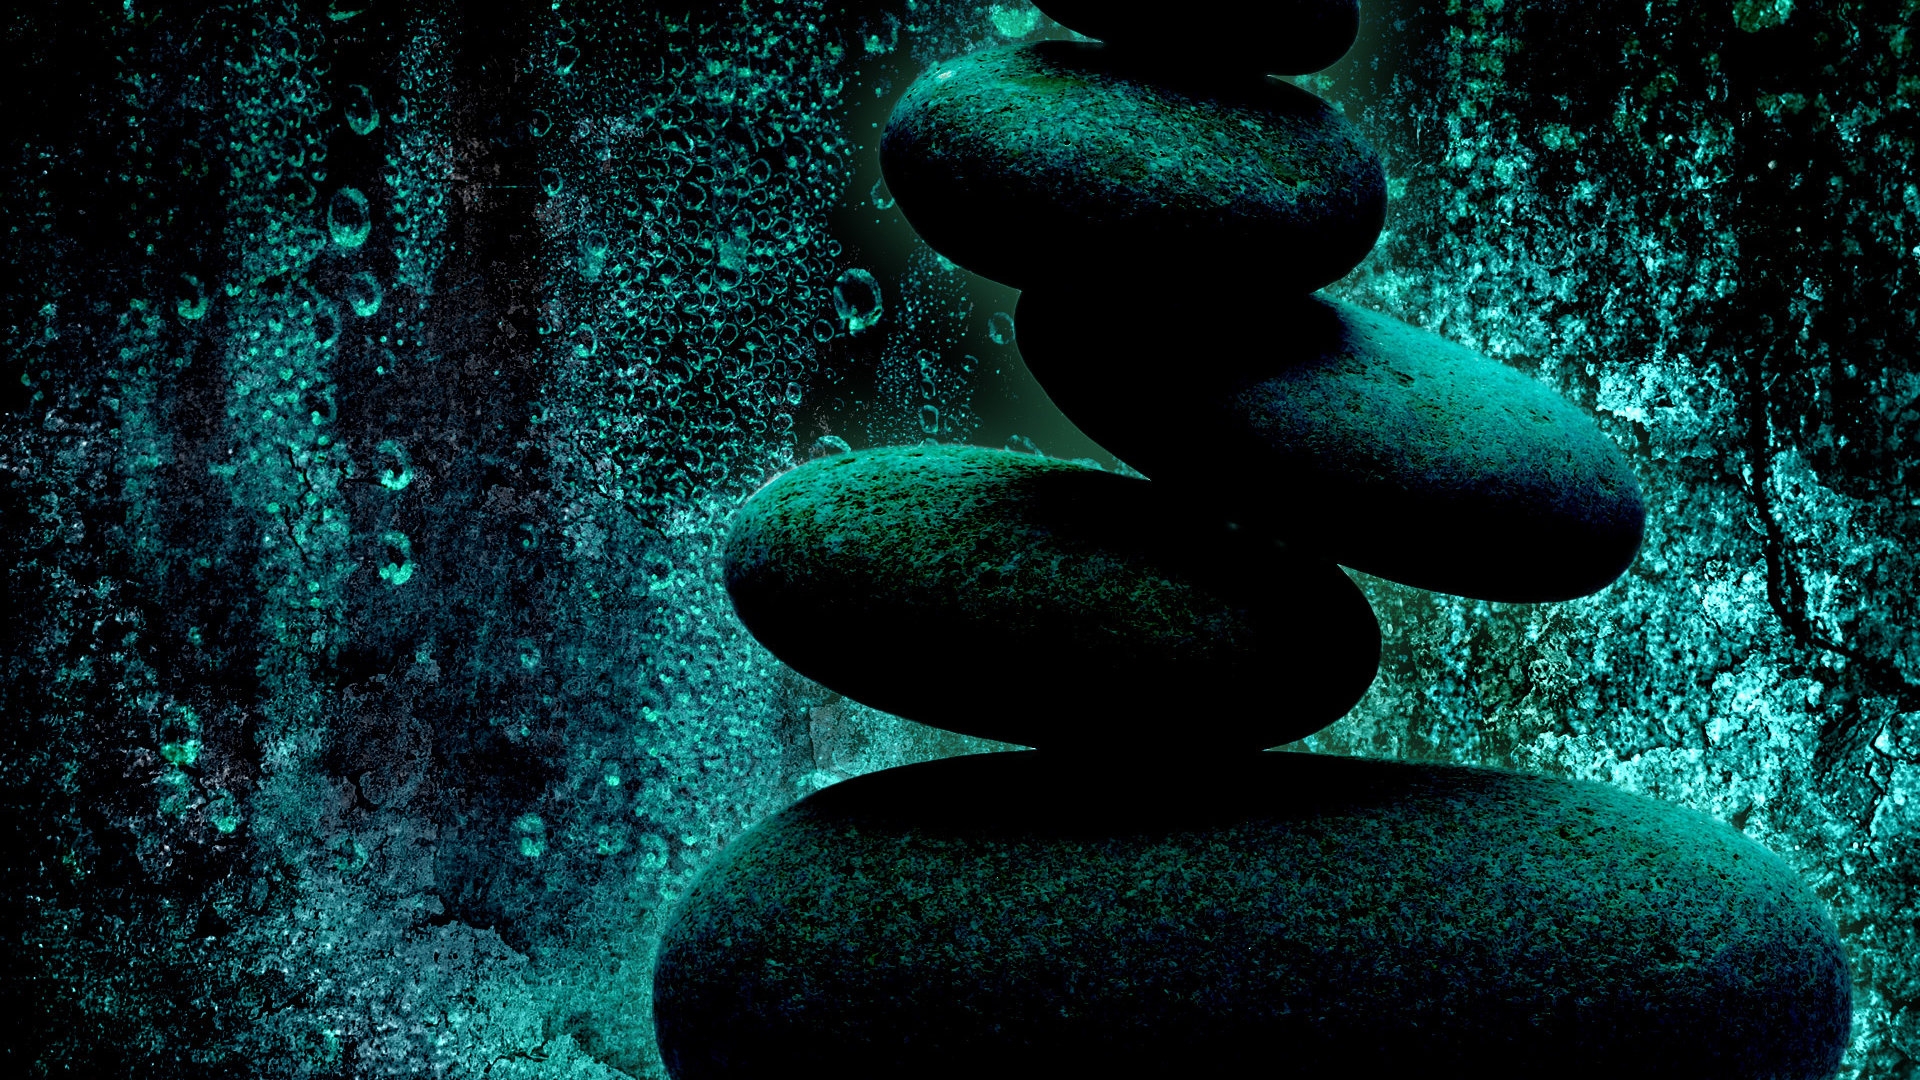 Amazing Stone 19201080 Wallpaper HD Wallpaper with 1920x1080